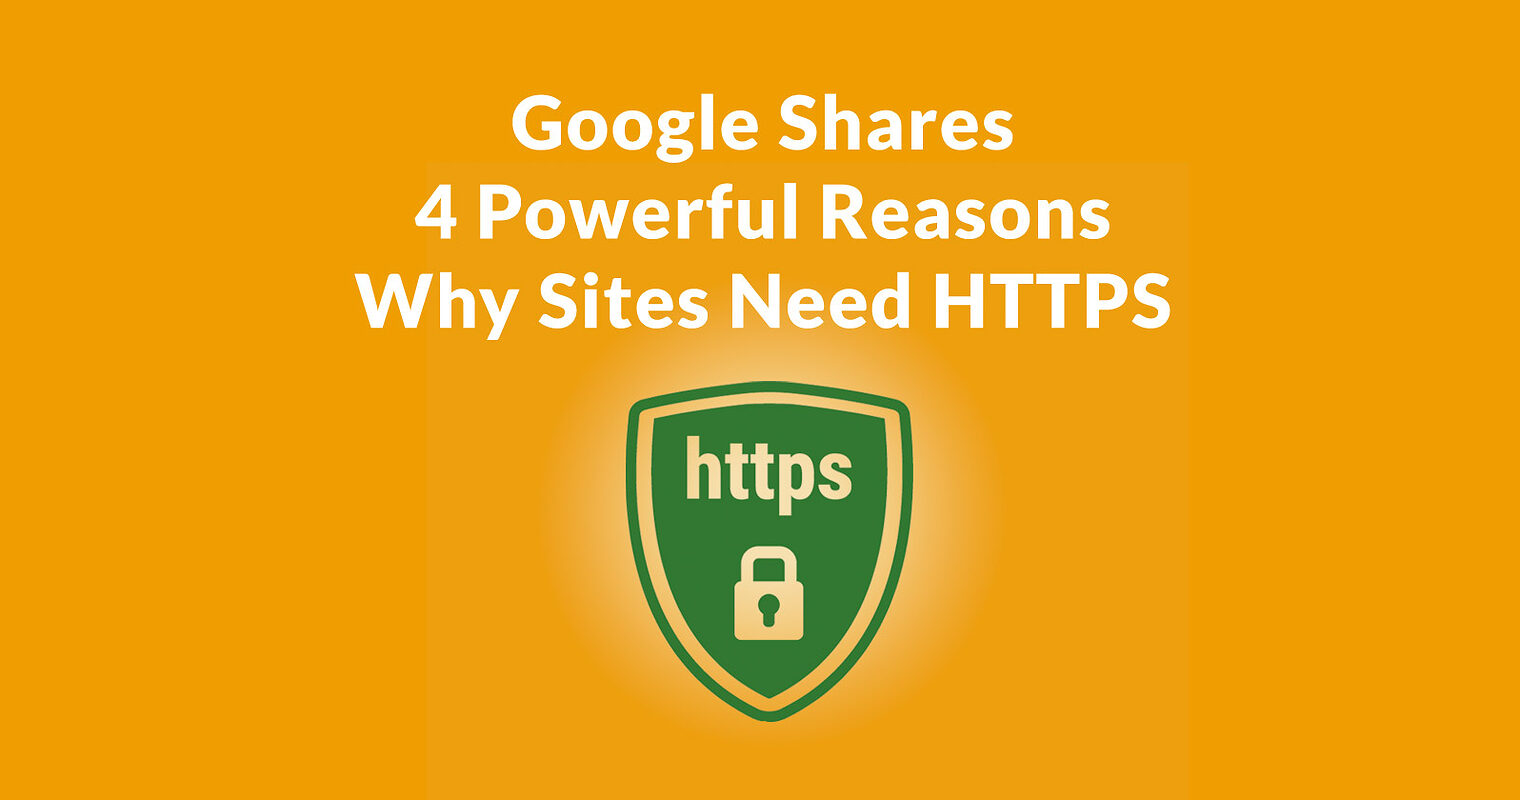 Google Engineer Lists 4 Powerful Reasons Why Sites Should Upgrade to HTTPS